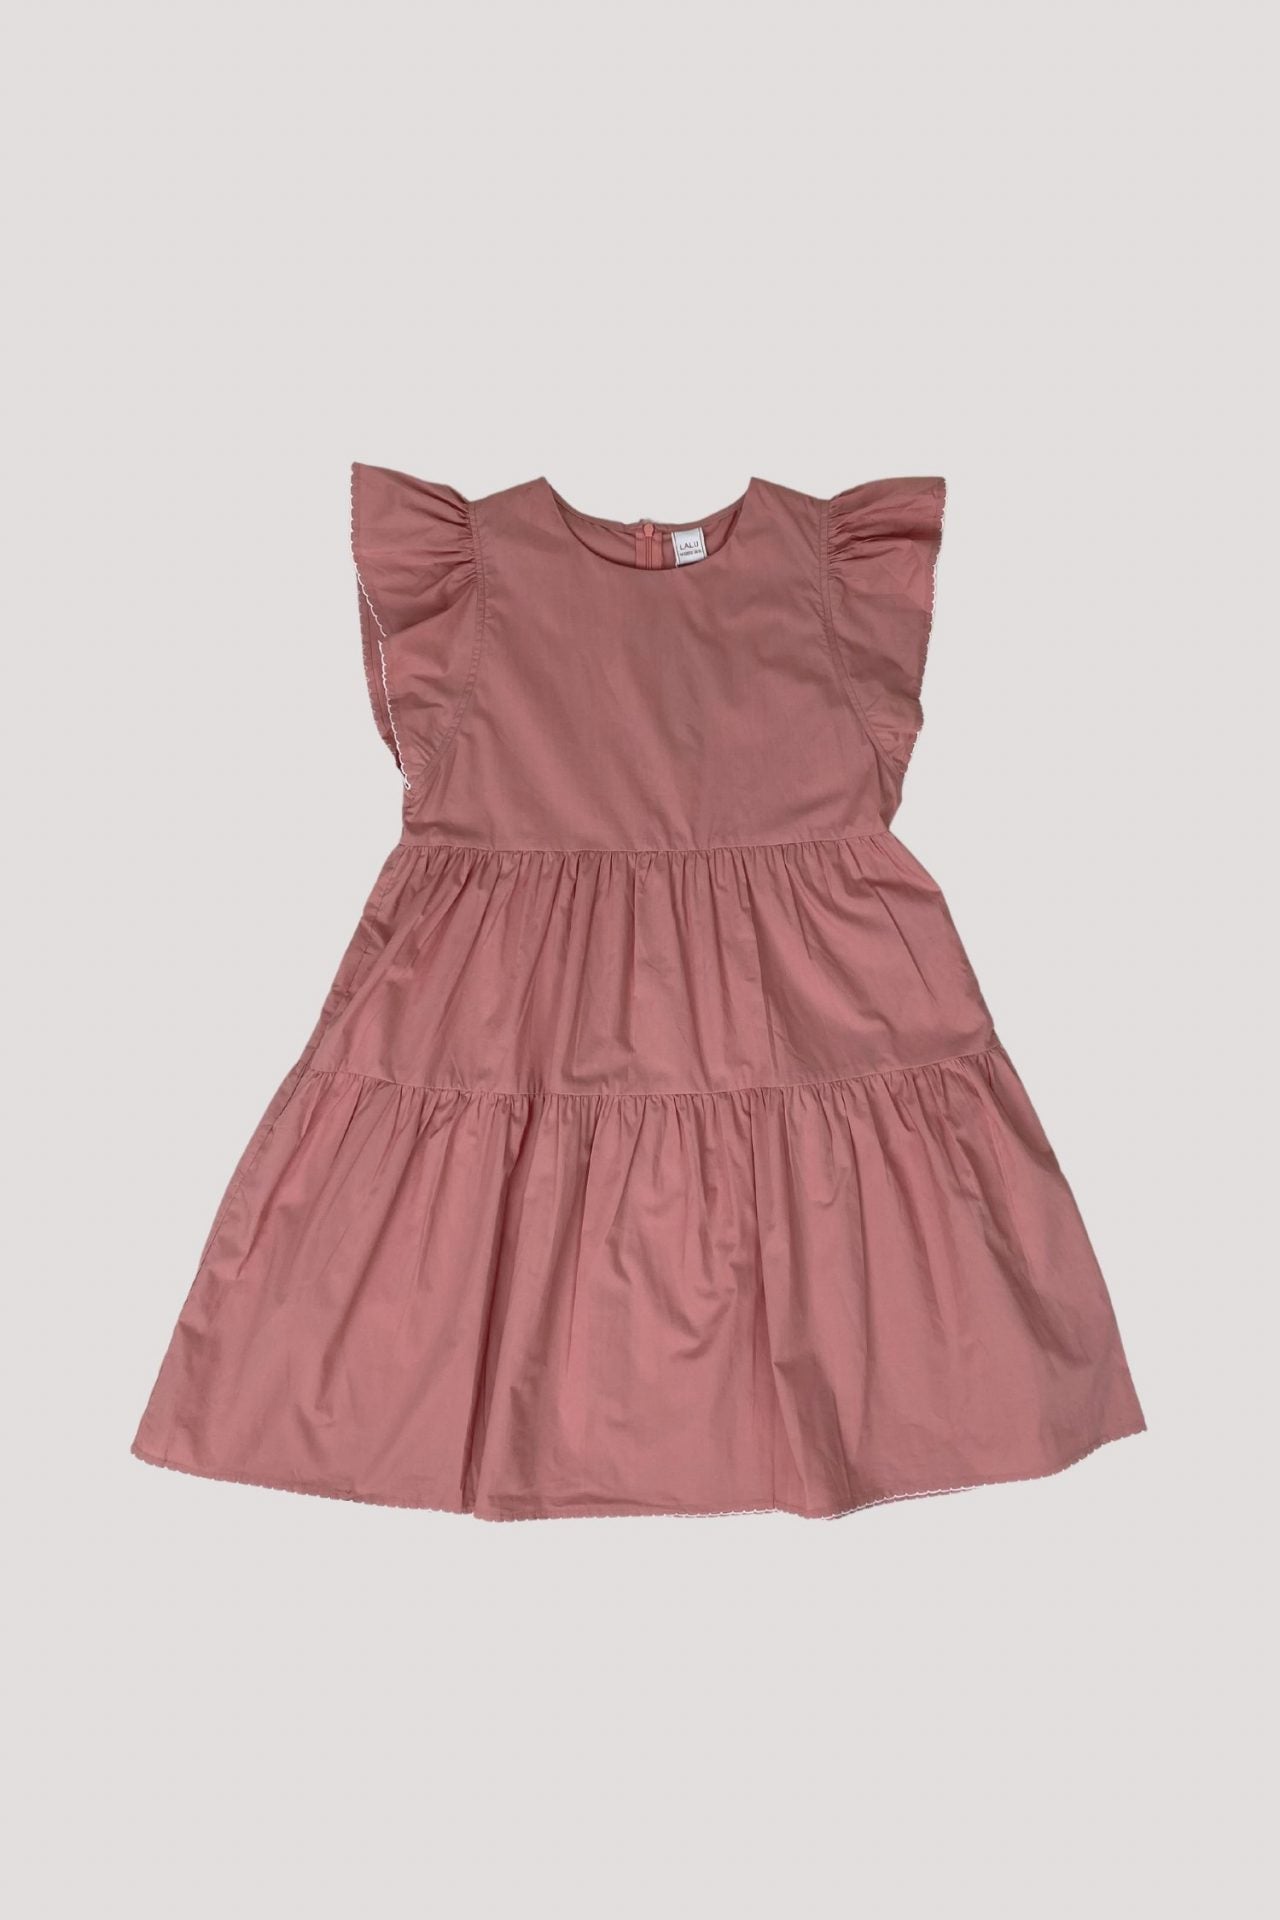 10535 FLARE BABY DOLL DRESS BLUSH FRONT